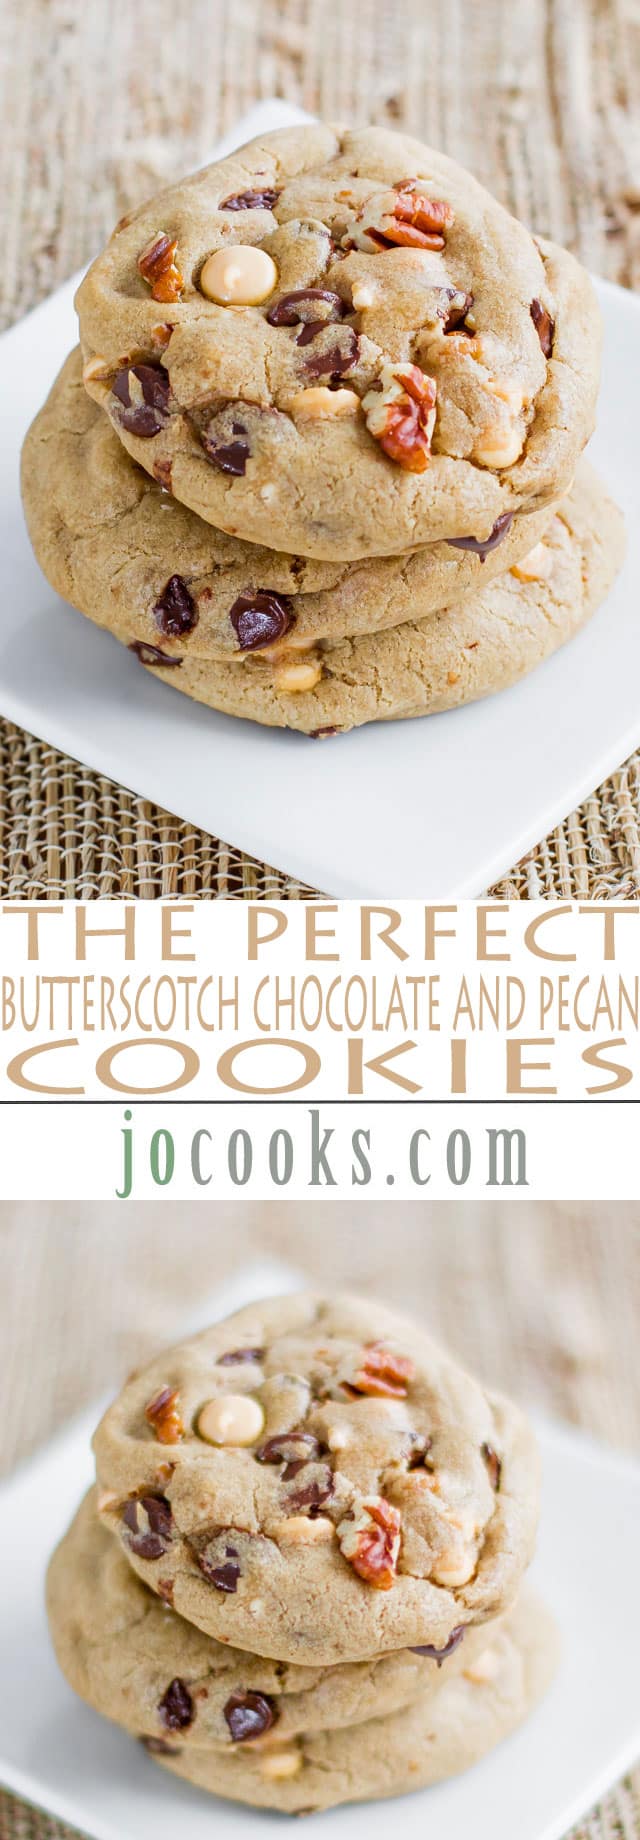 butterscotch-chocolate-and-pecan-cookies-collage